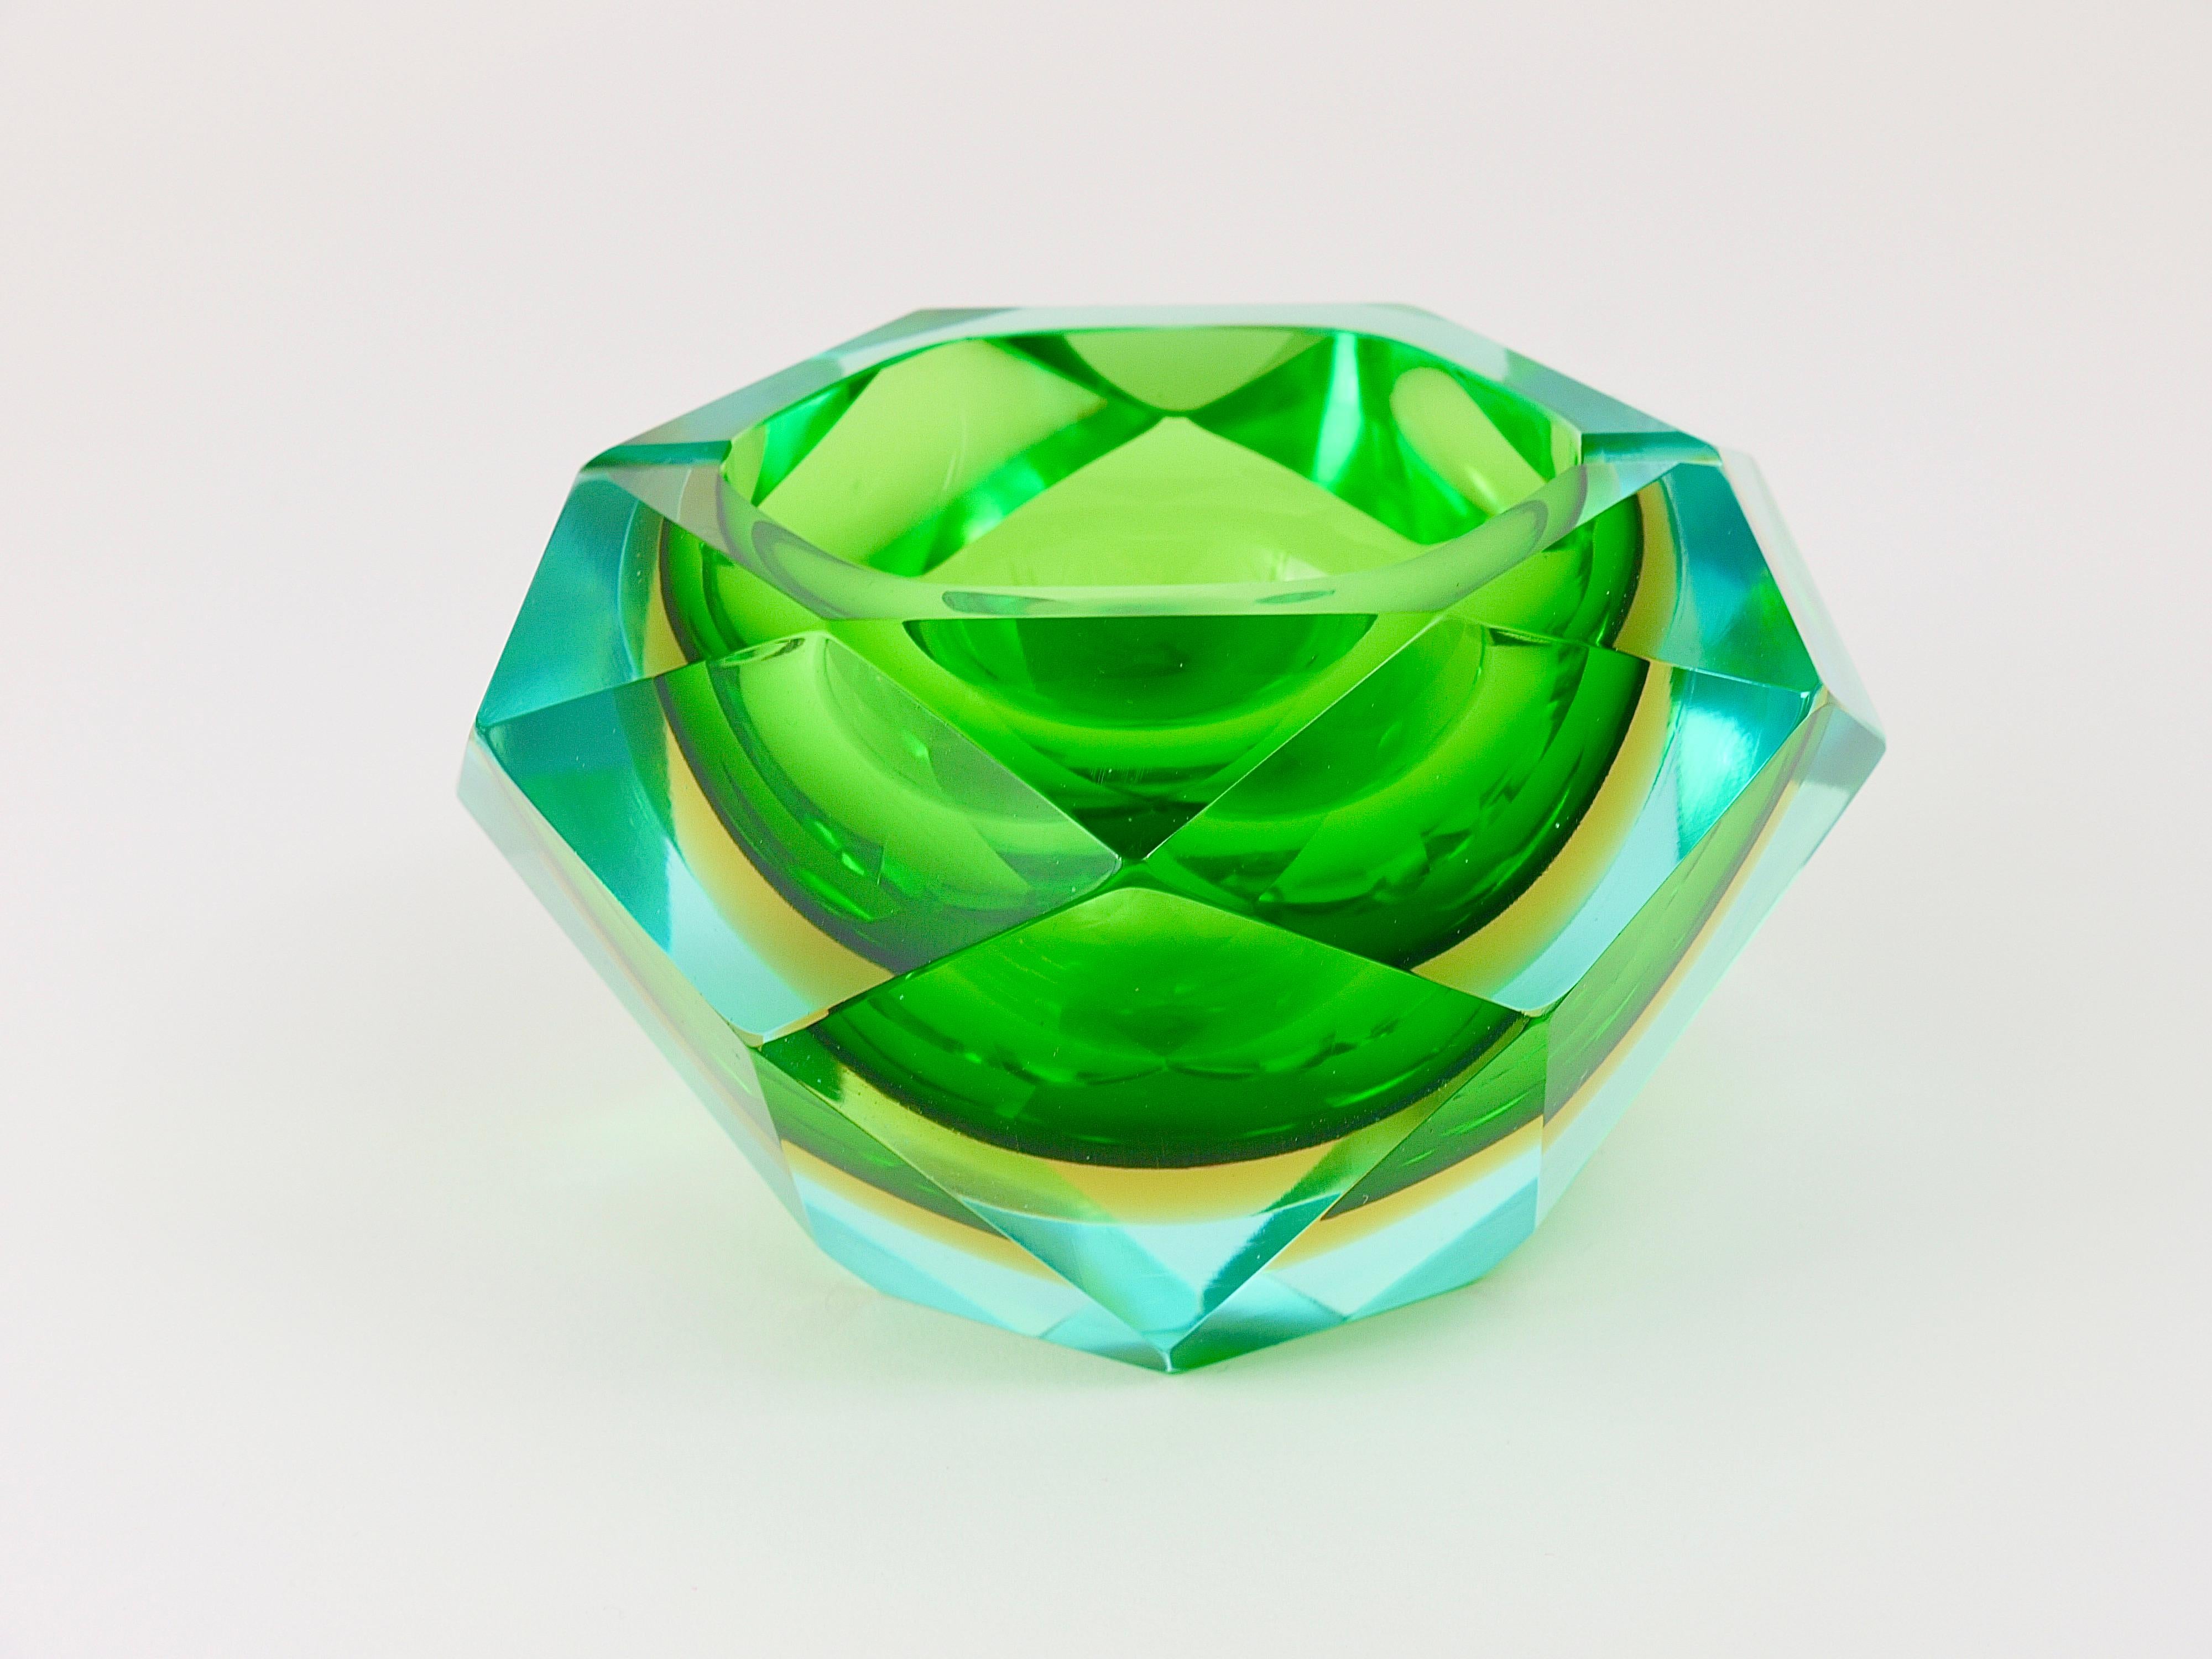 1960s Flavio Poli Colorful Faceted Diamond Ashtray by Seguso, Murano, Italy In Good Condition For Sale In Vienna, AT